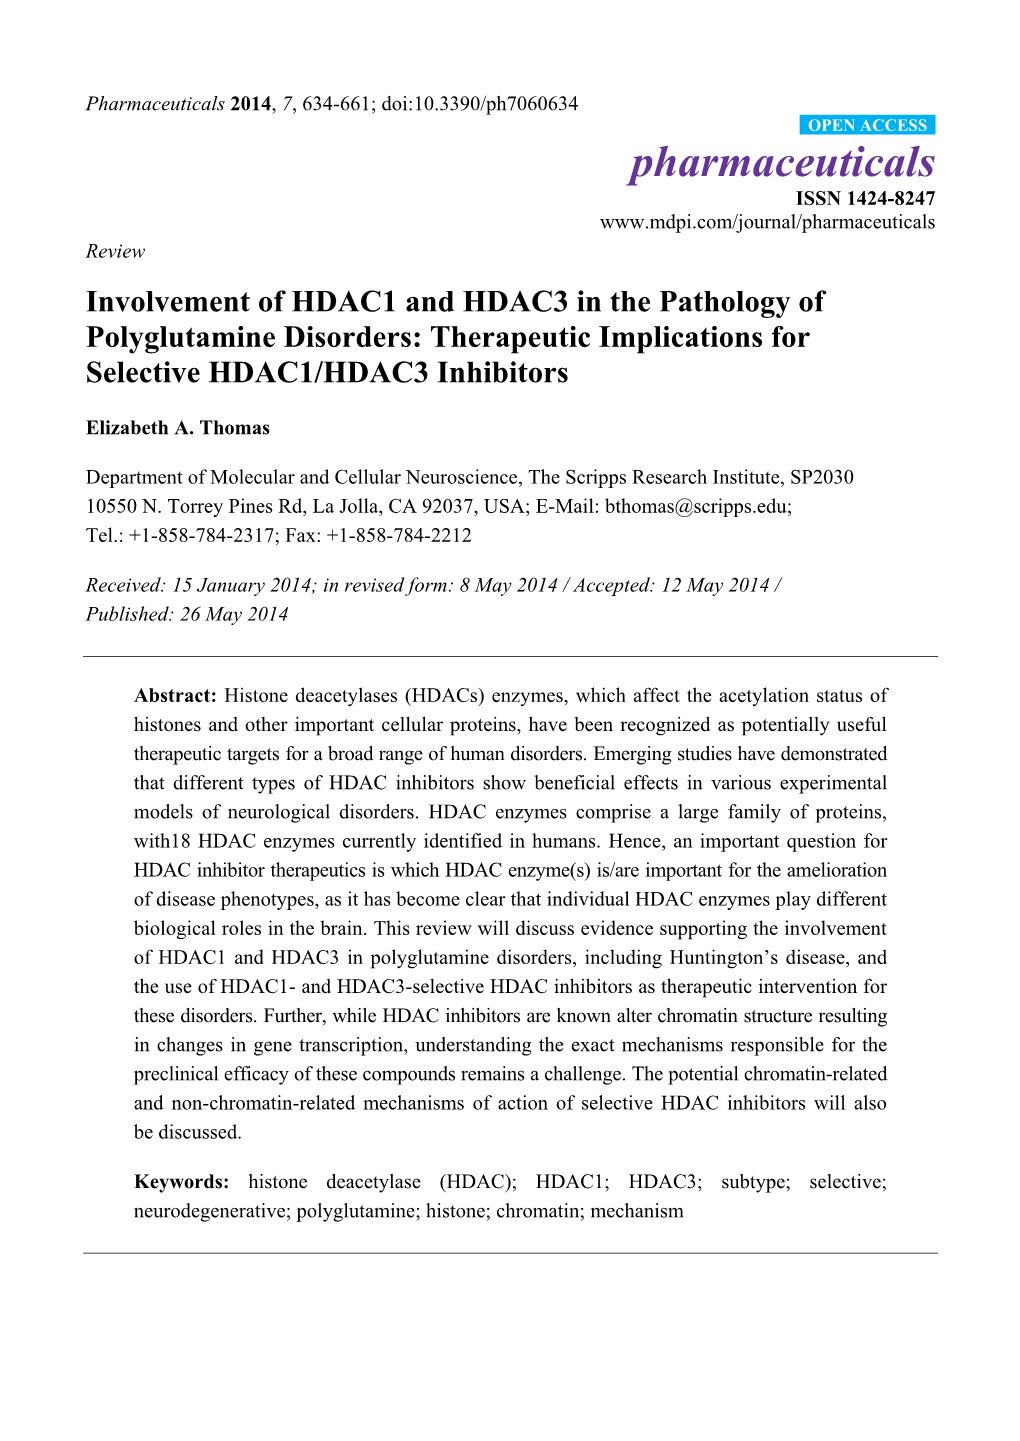 Therapeutic Implications for Selective HDAC1/HDAC3 Inhibitors